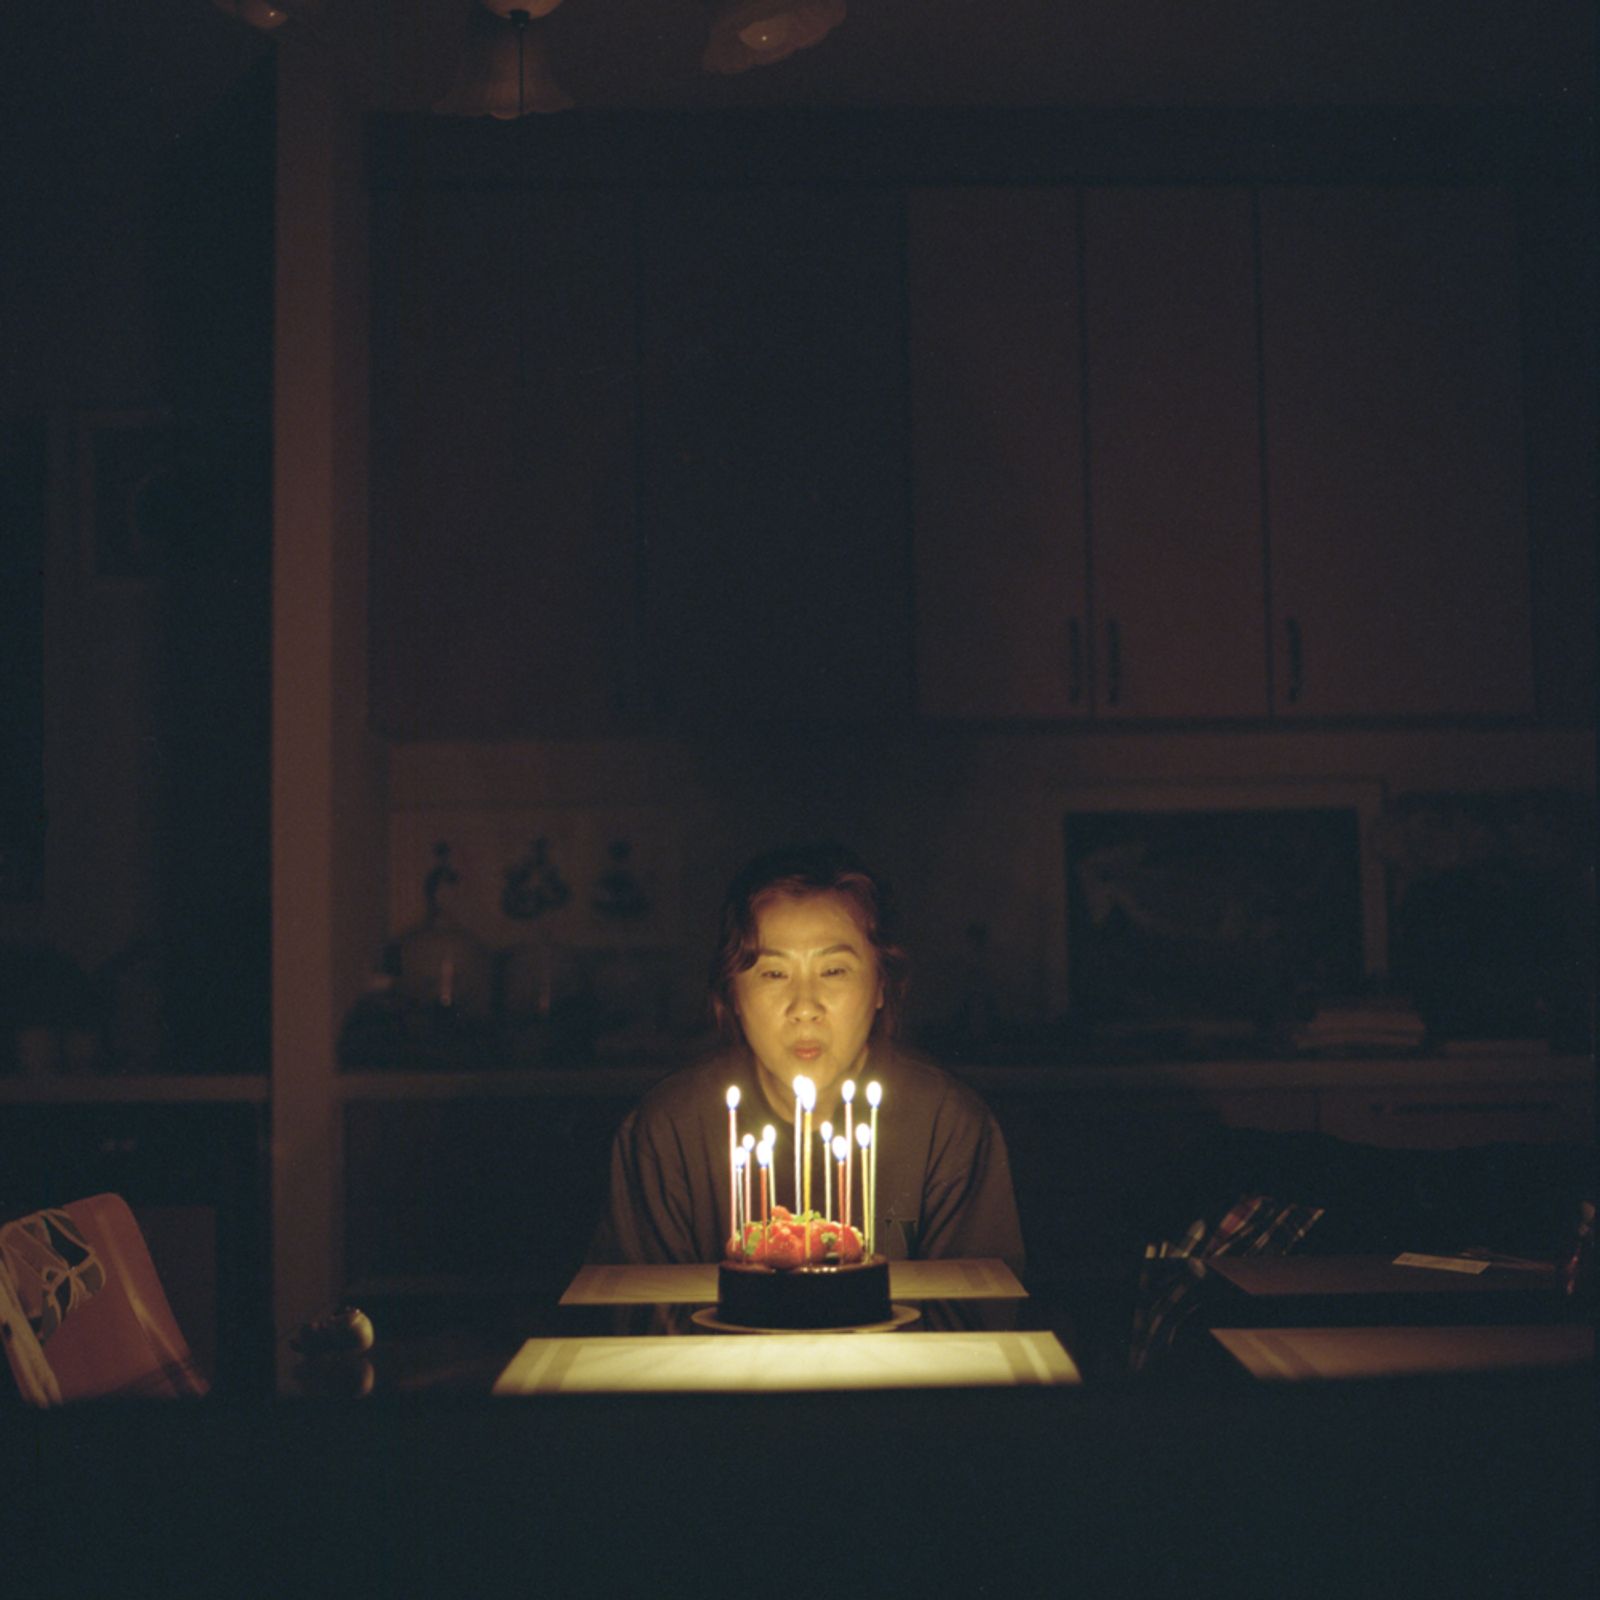 © Shina Peng - Image from the See You In 6 Months photography project